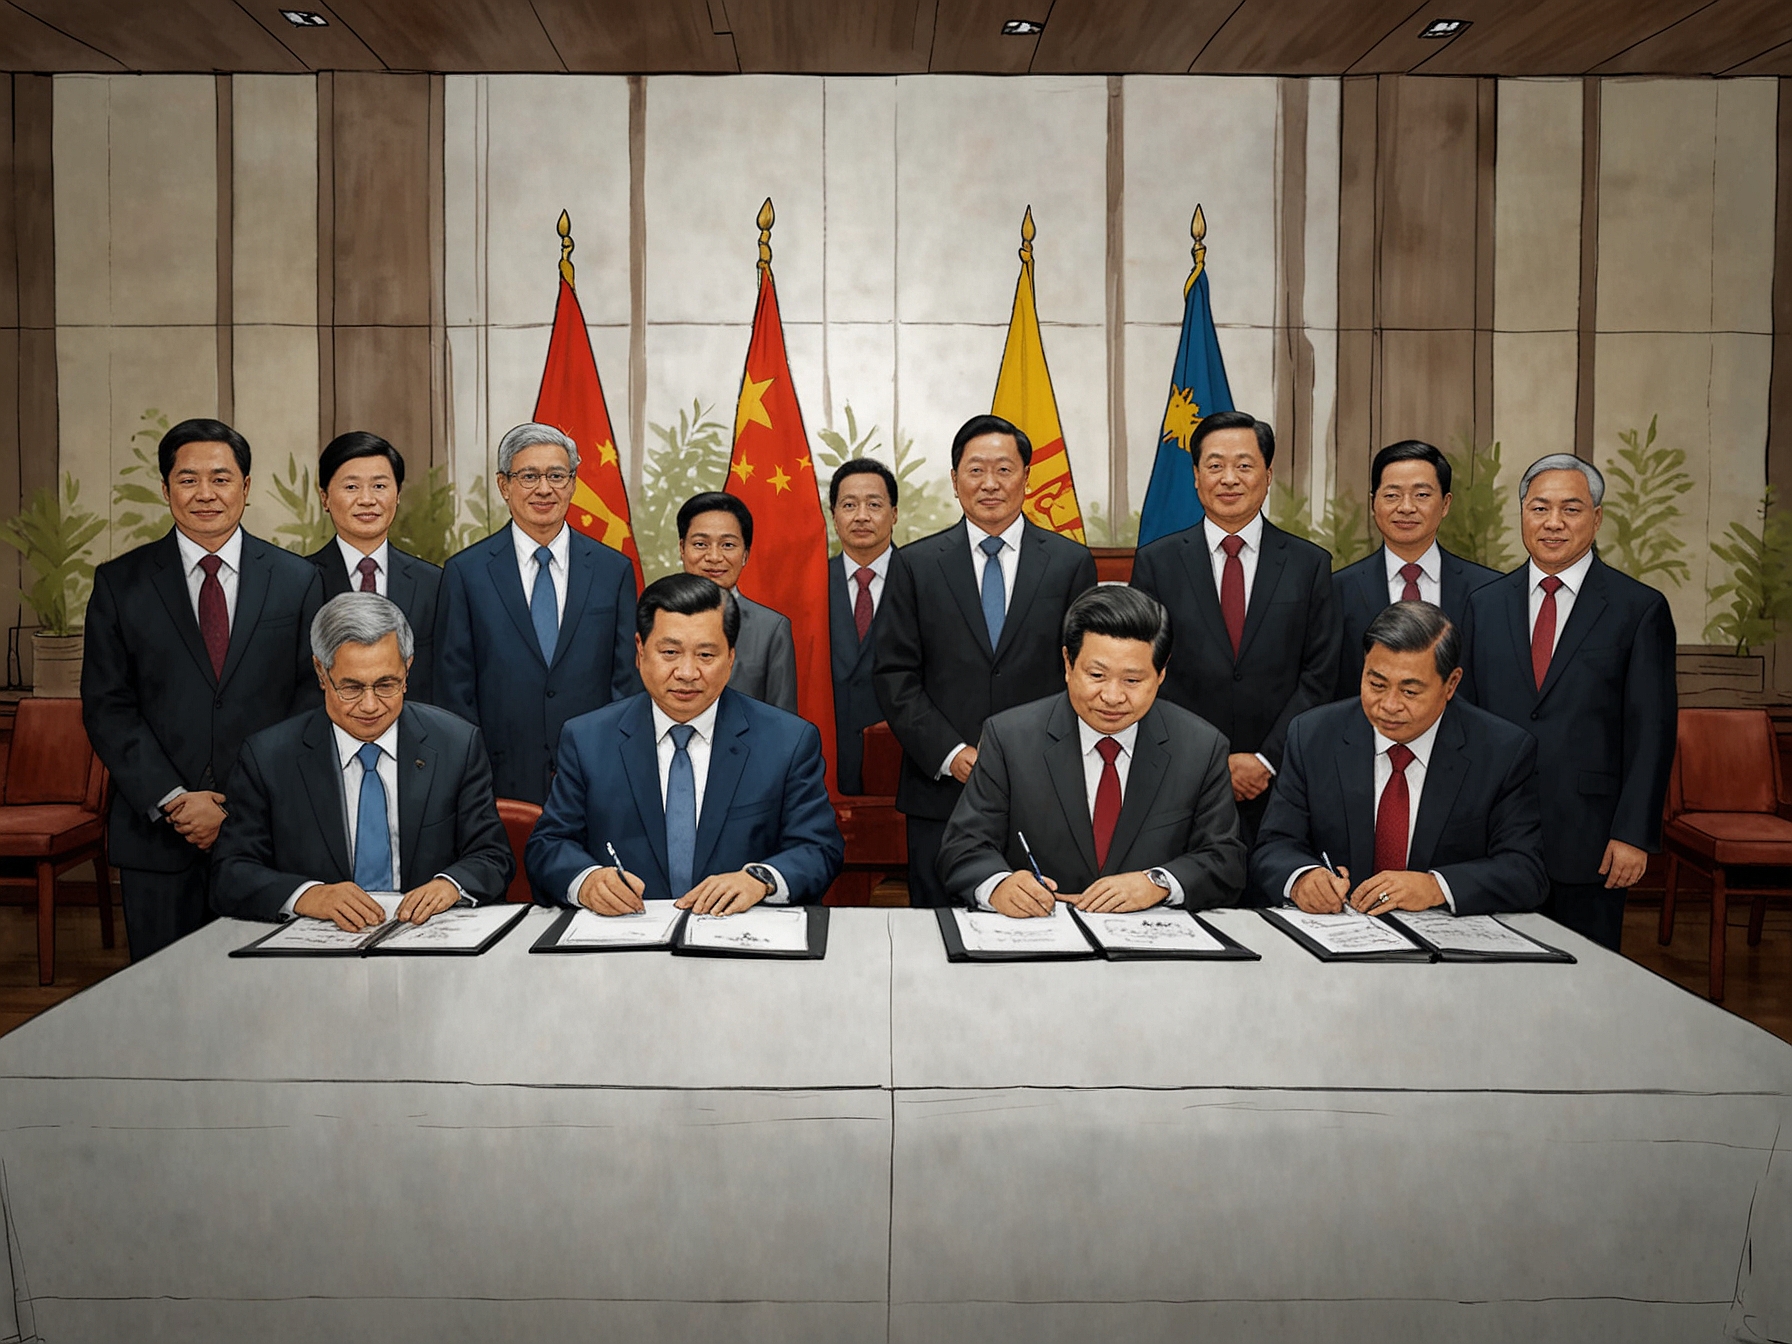 Sri Lankan officials and representatives from China sign the debt restructuring agreement, a vital step in stabilizing the economy after the 2022 financial crash. The deal is a beacon of hope for economic revival.